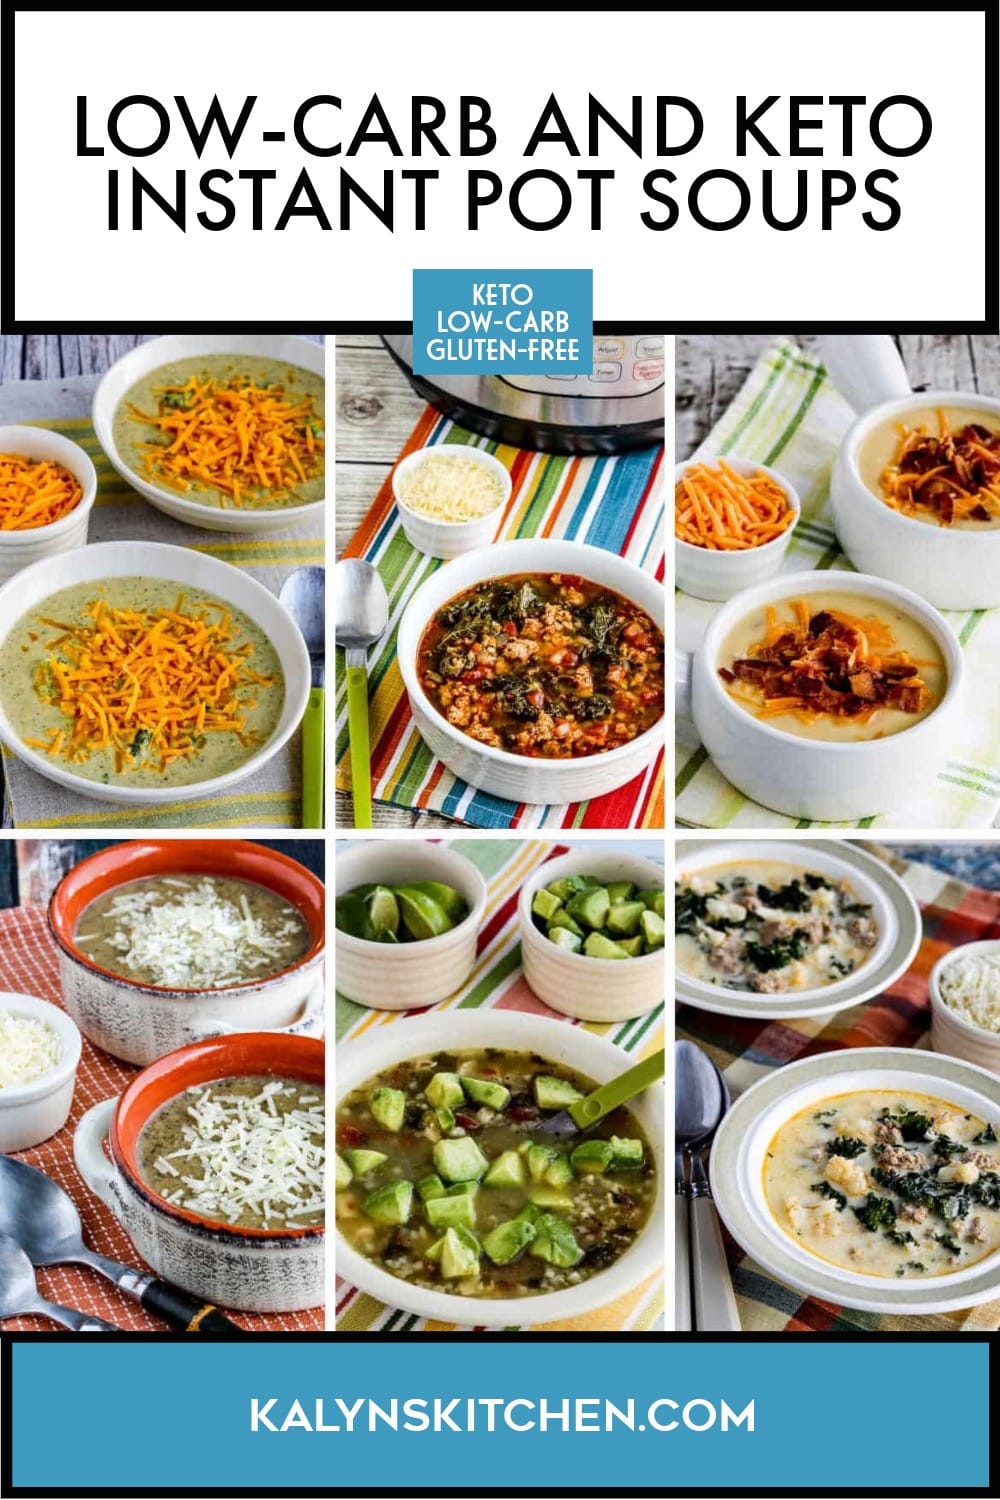 Pinterest image of Low-Carb and Keto Instant Pot Soups